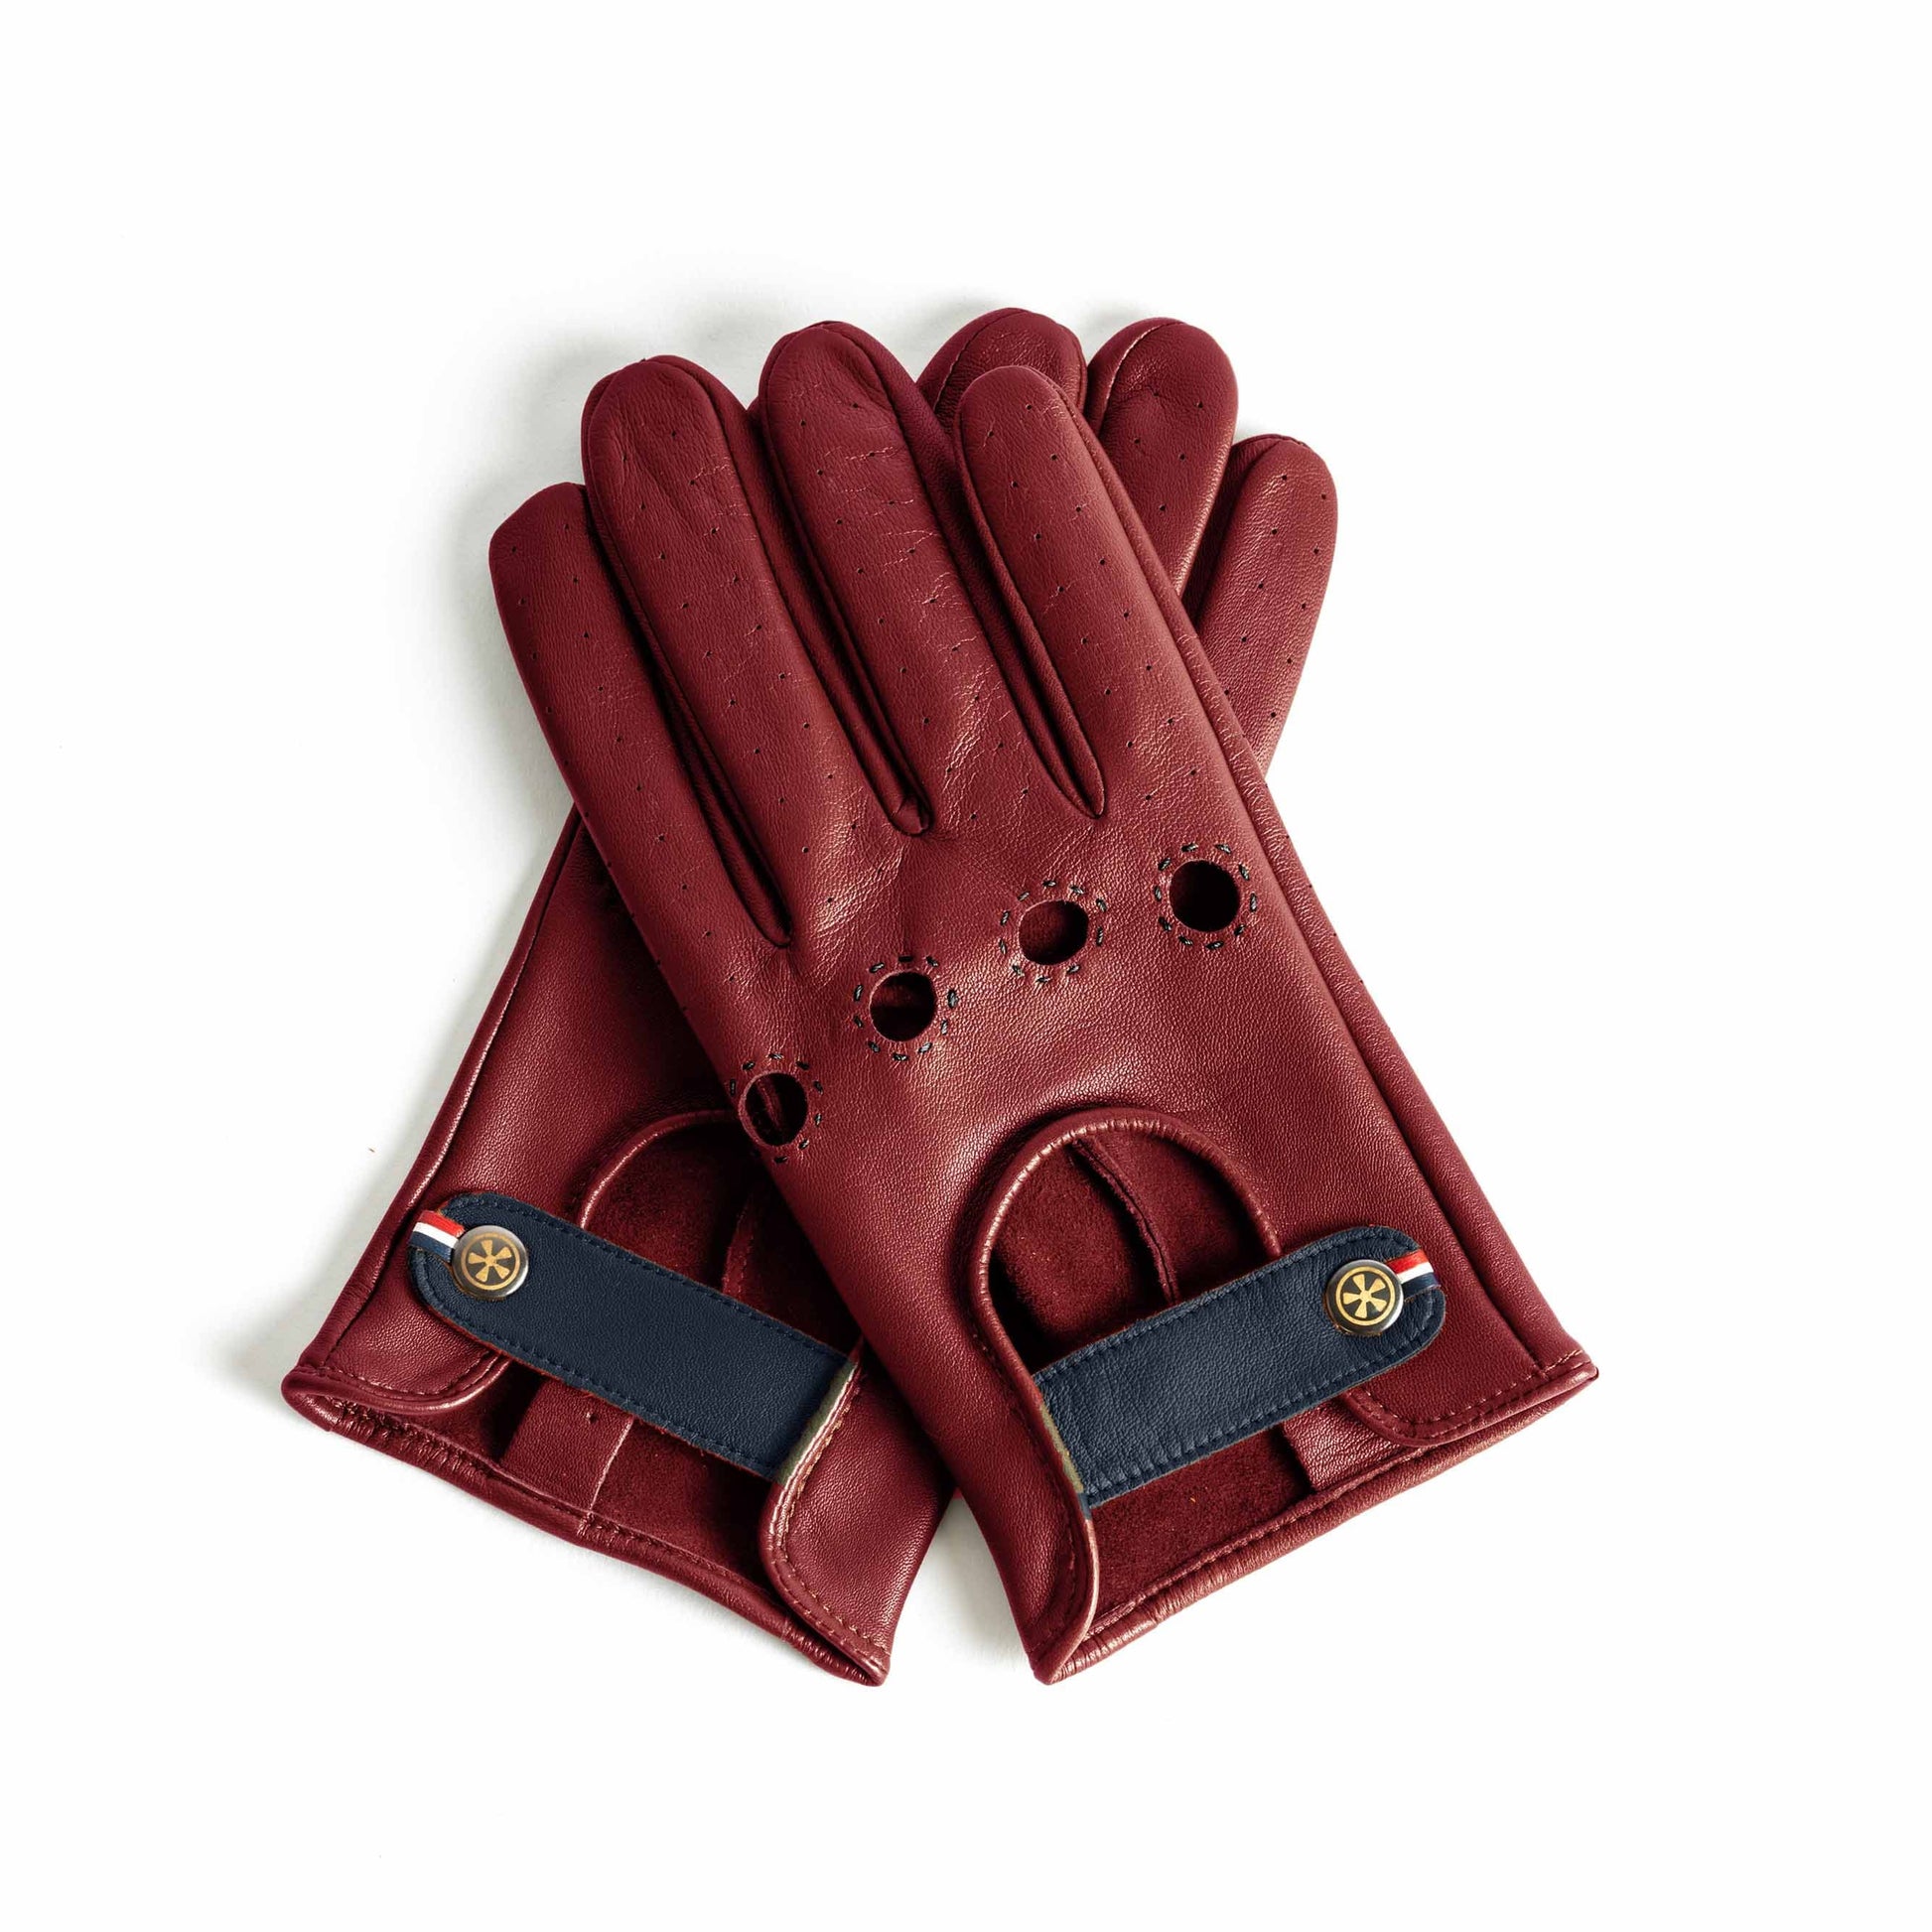 Classic red leather driving racing gloves